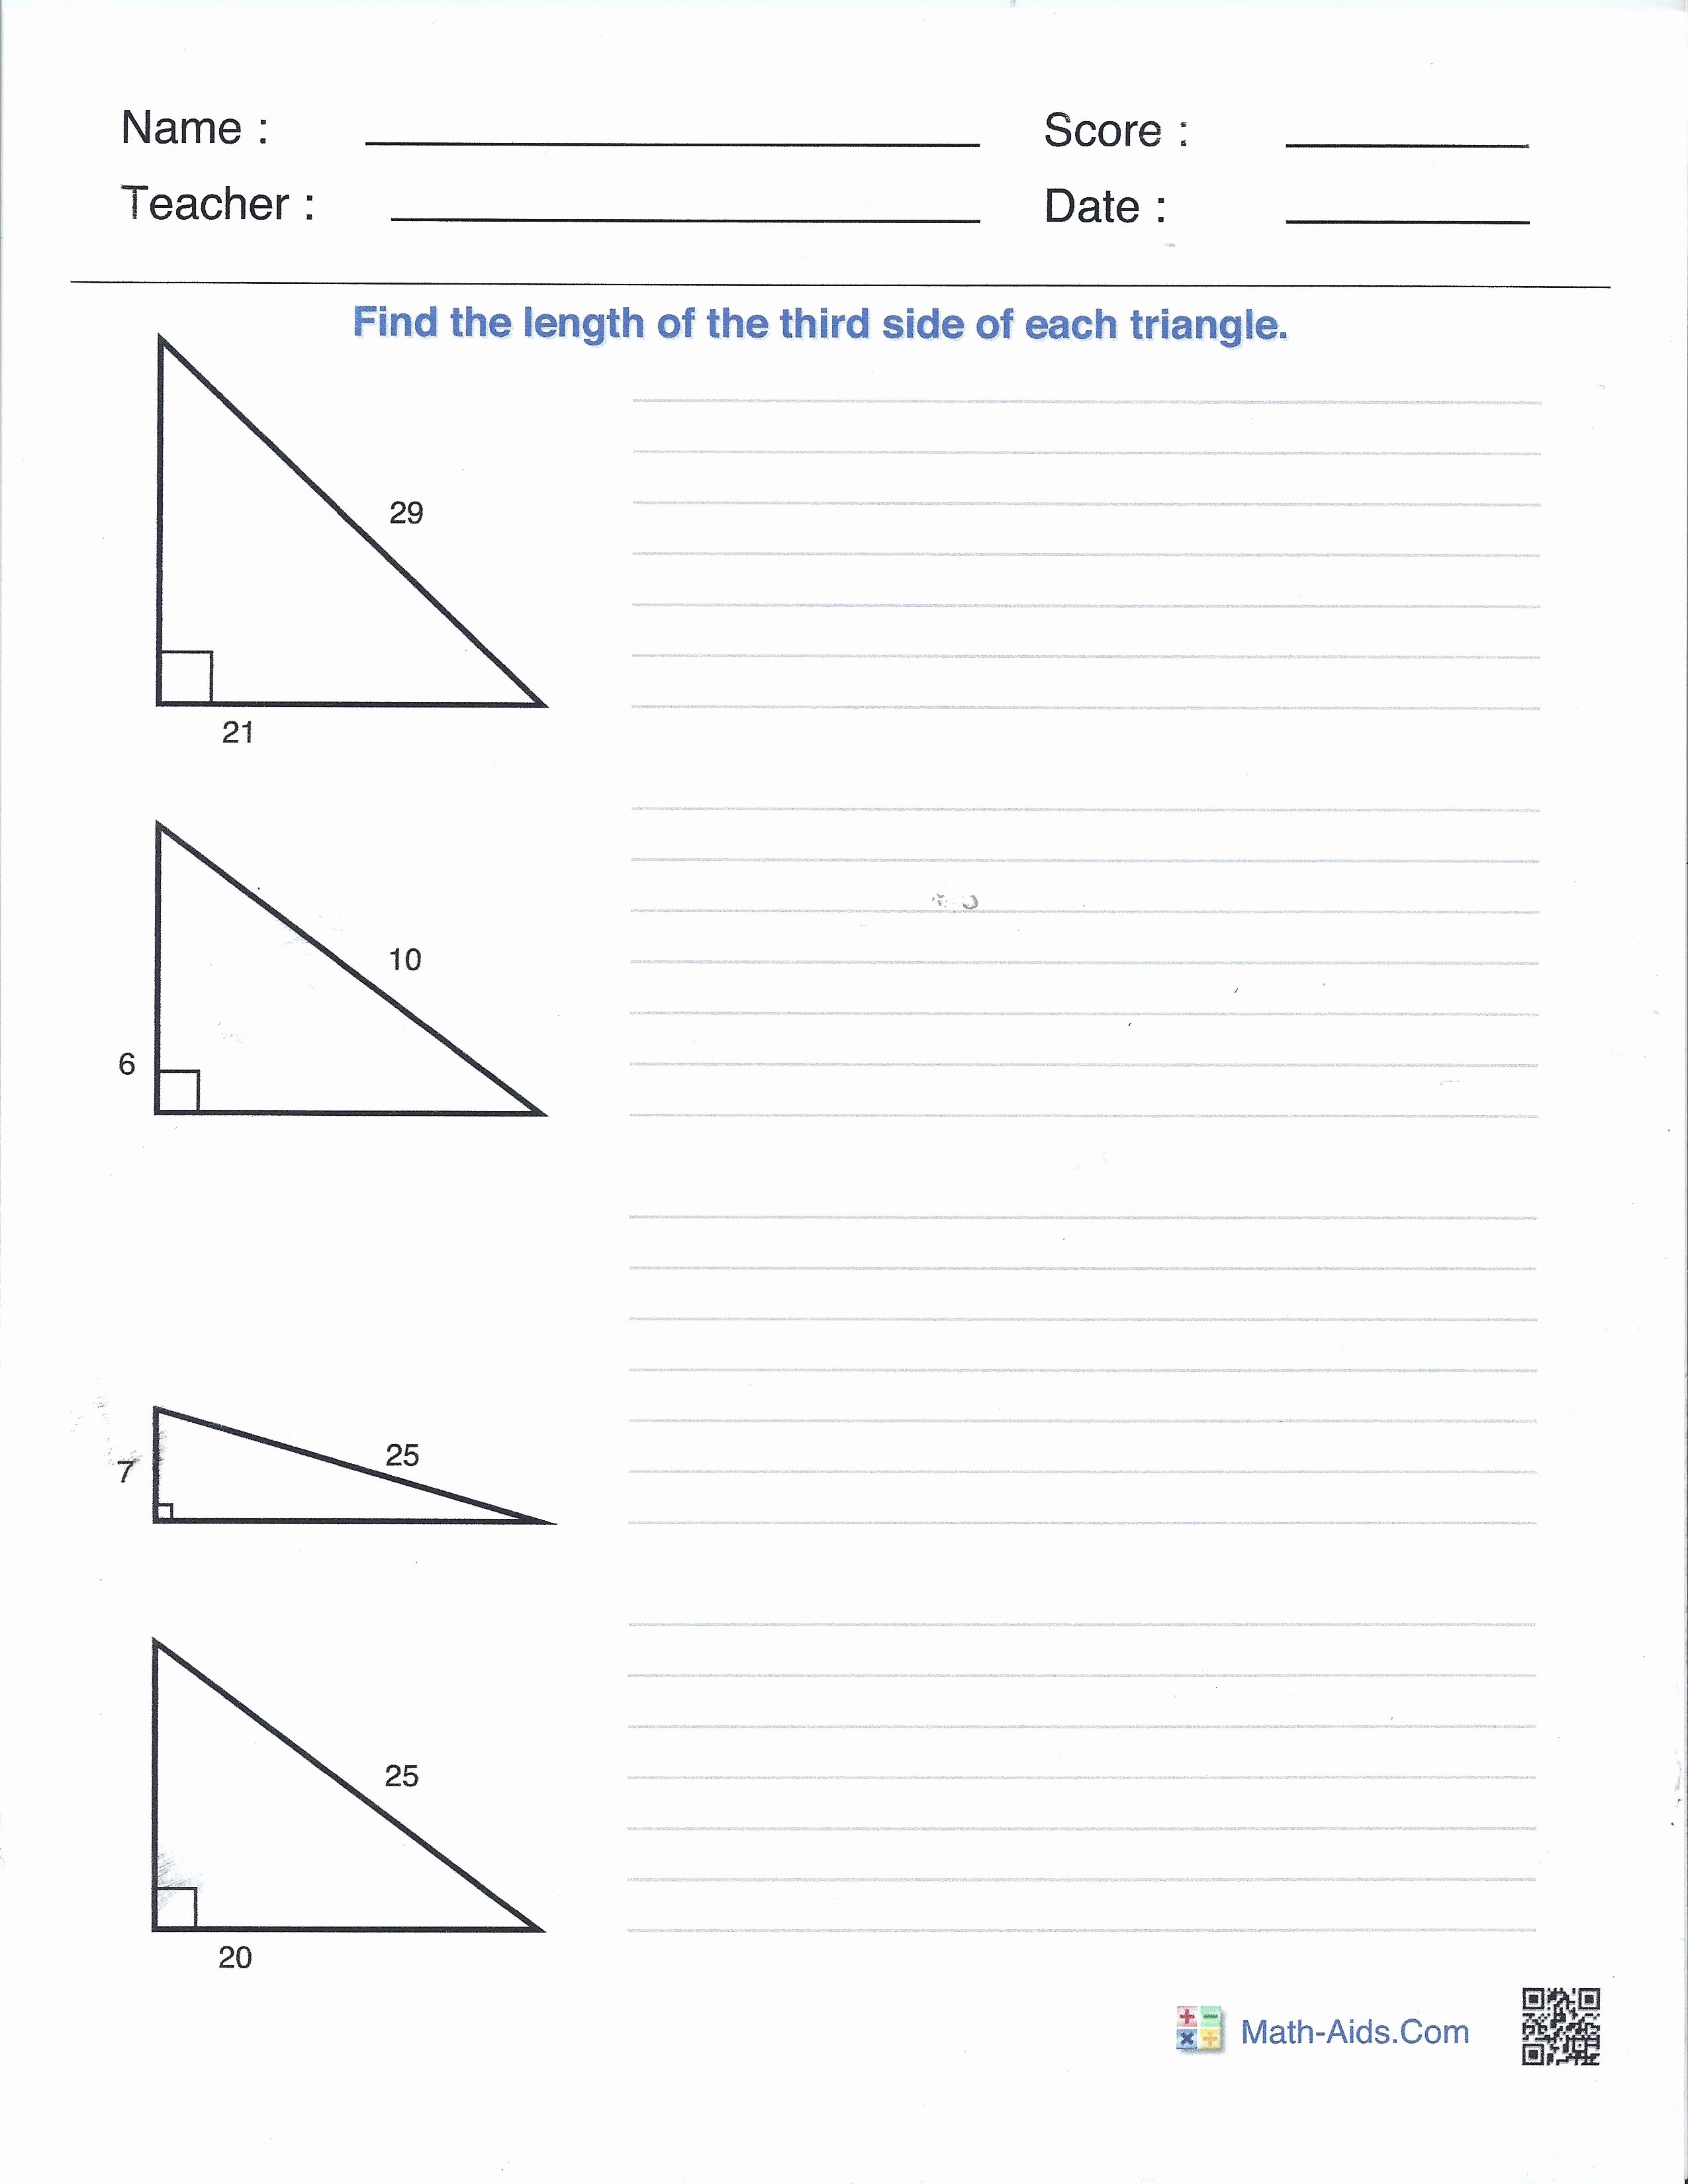 Pythagorean theorem Worksheet with Answers Inspirational Right Angles and the Pythagorean theorem